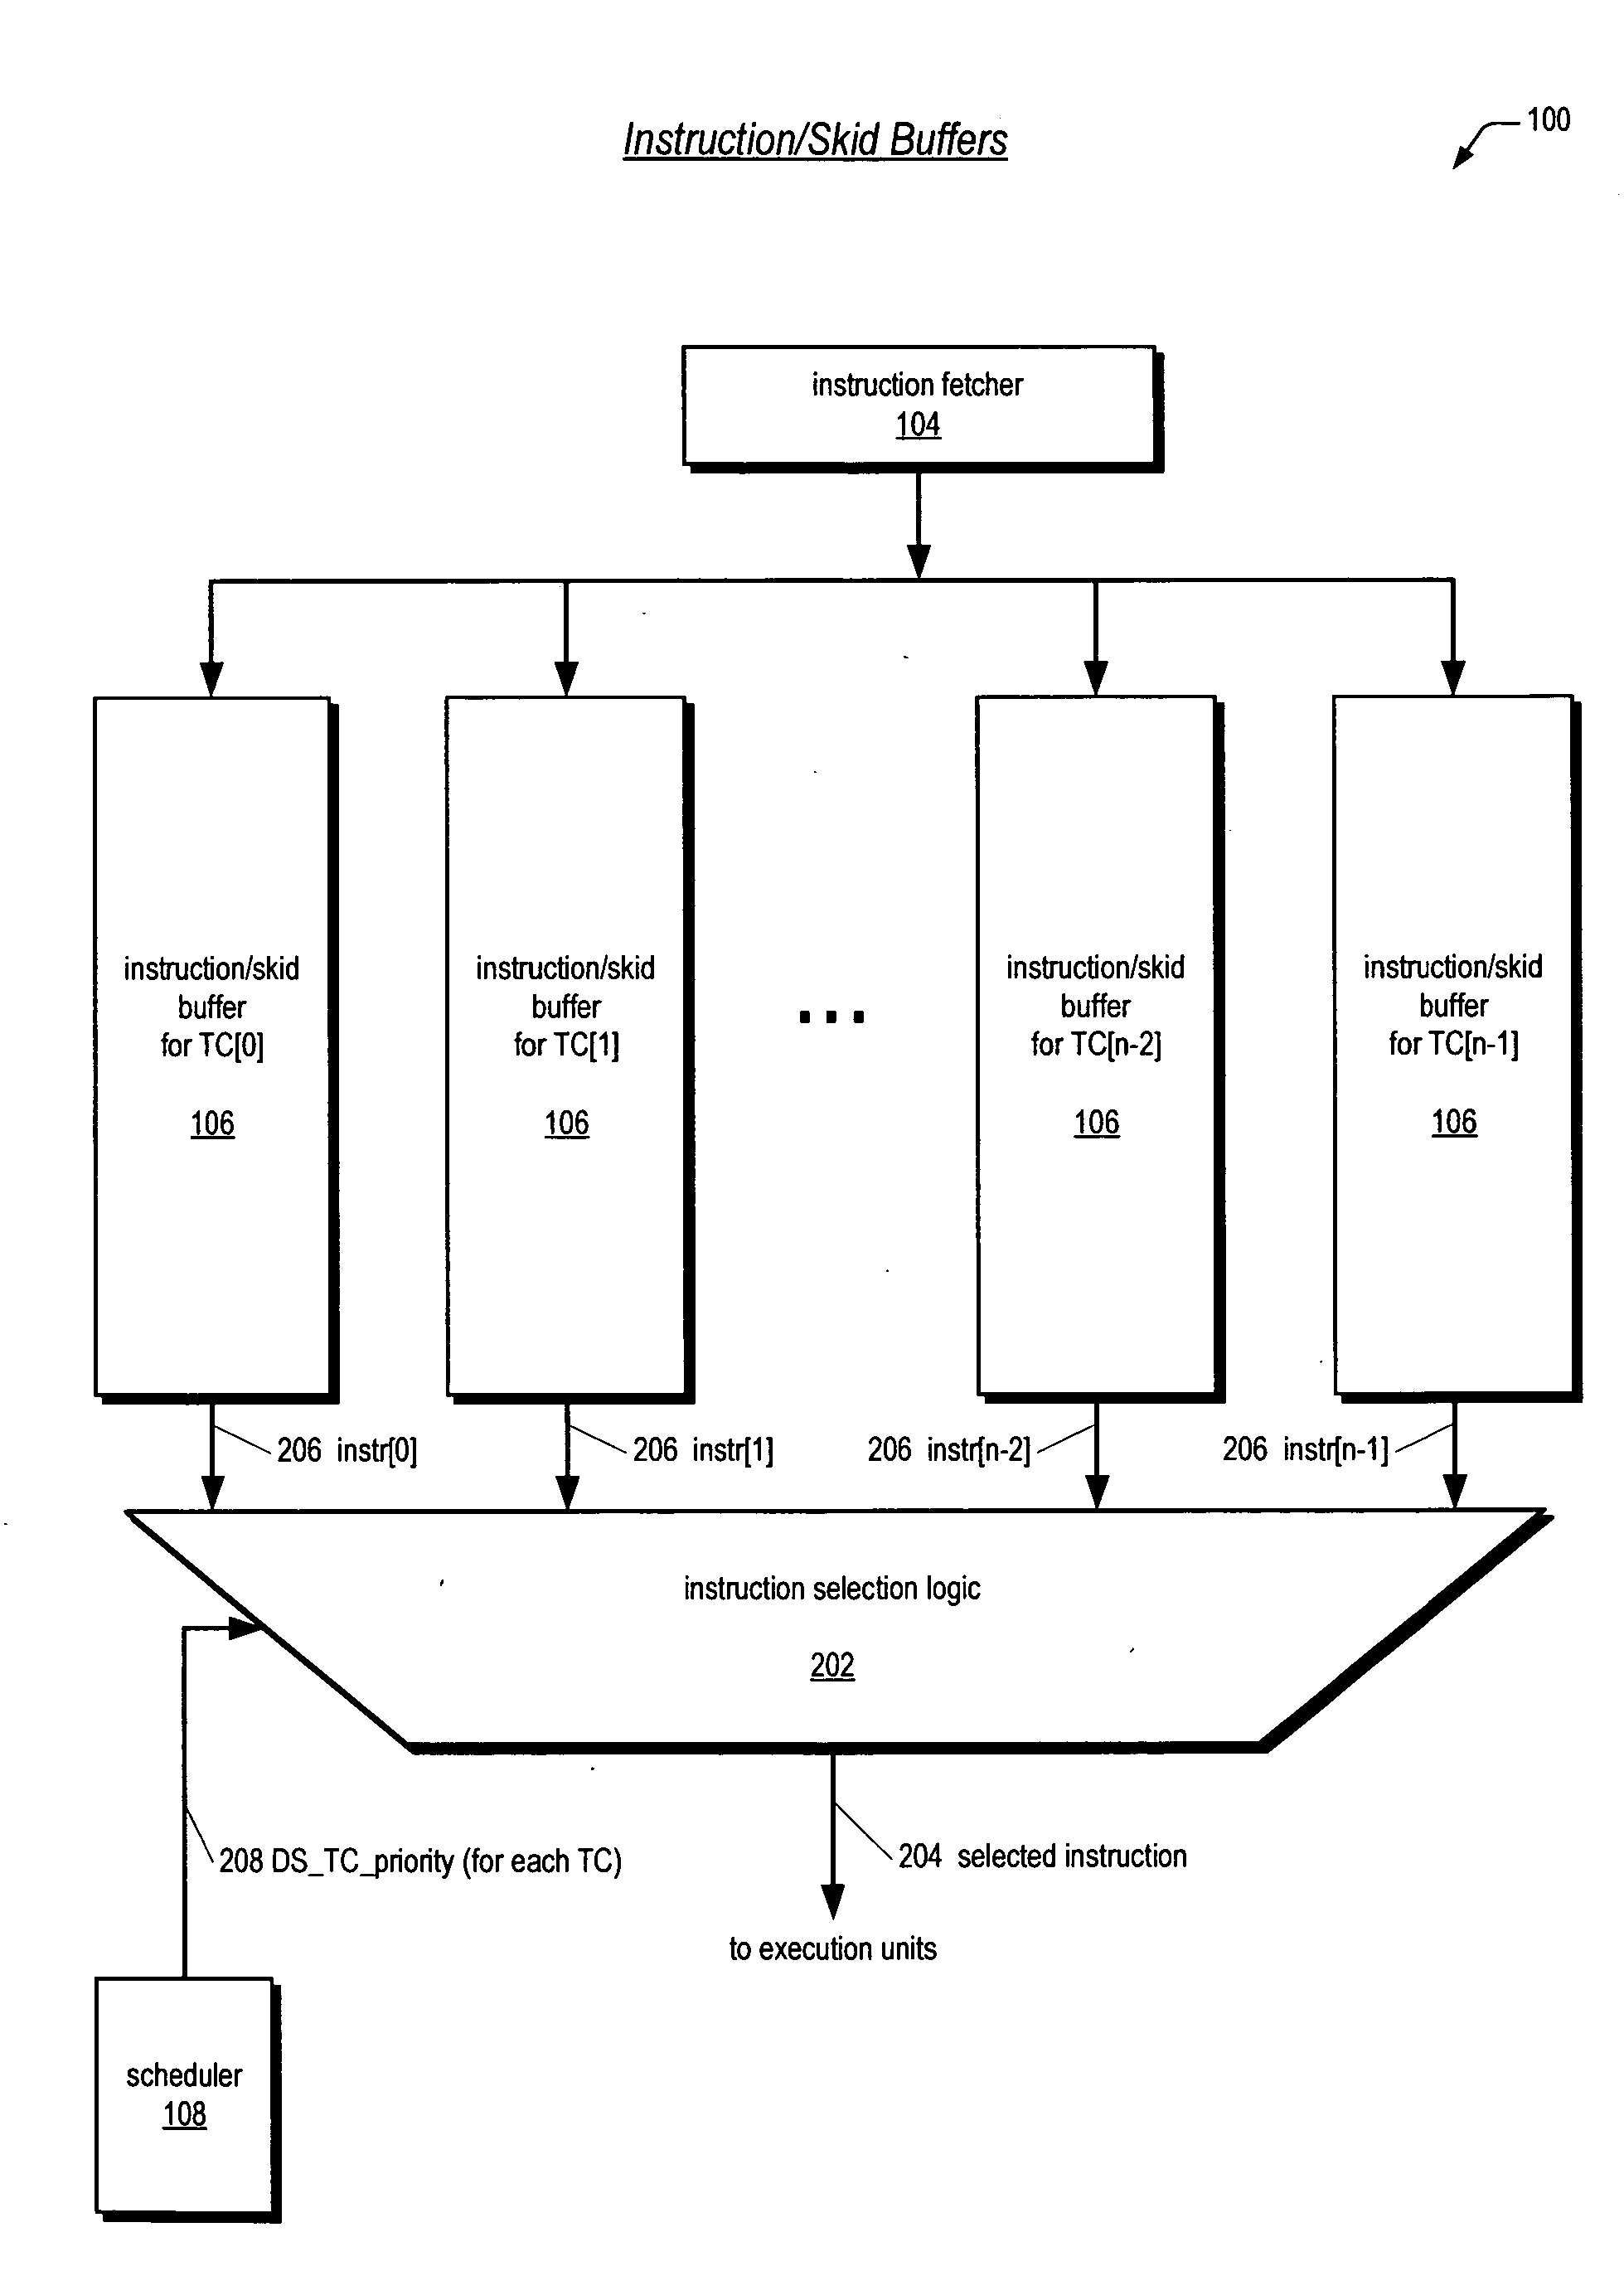 Instruction/skid buffers in a multithreading microprocessor